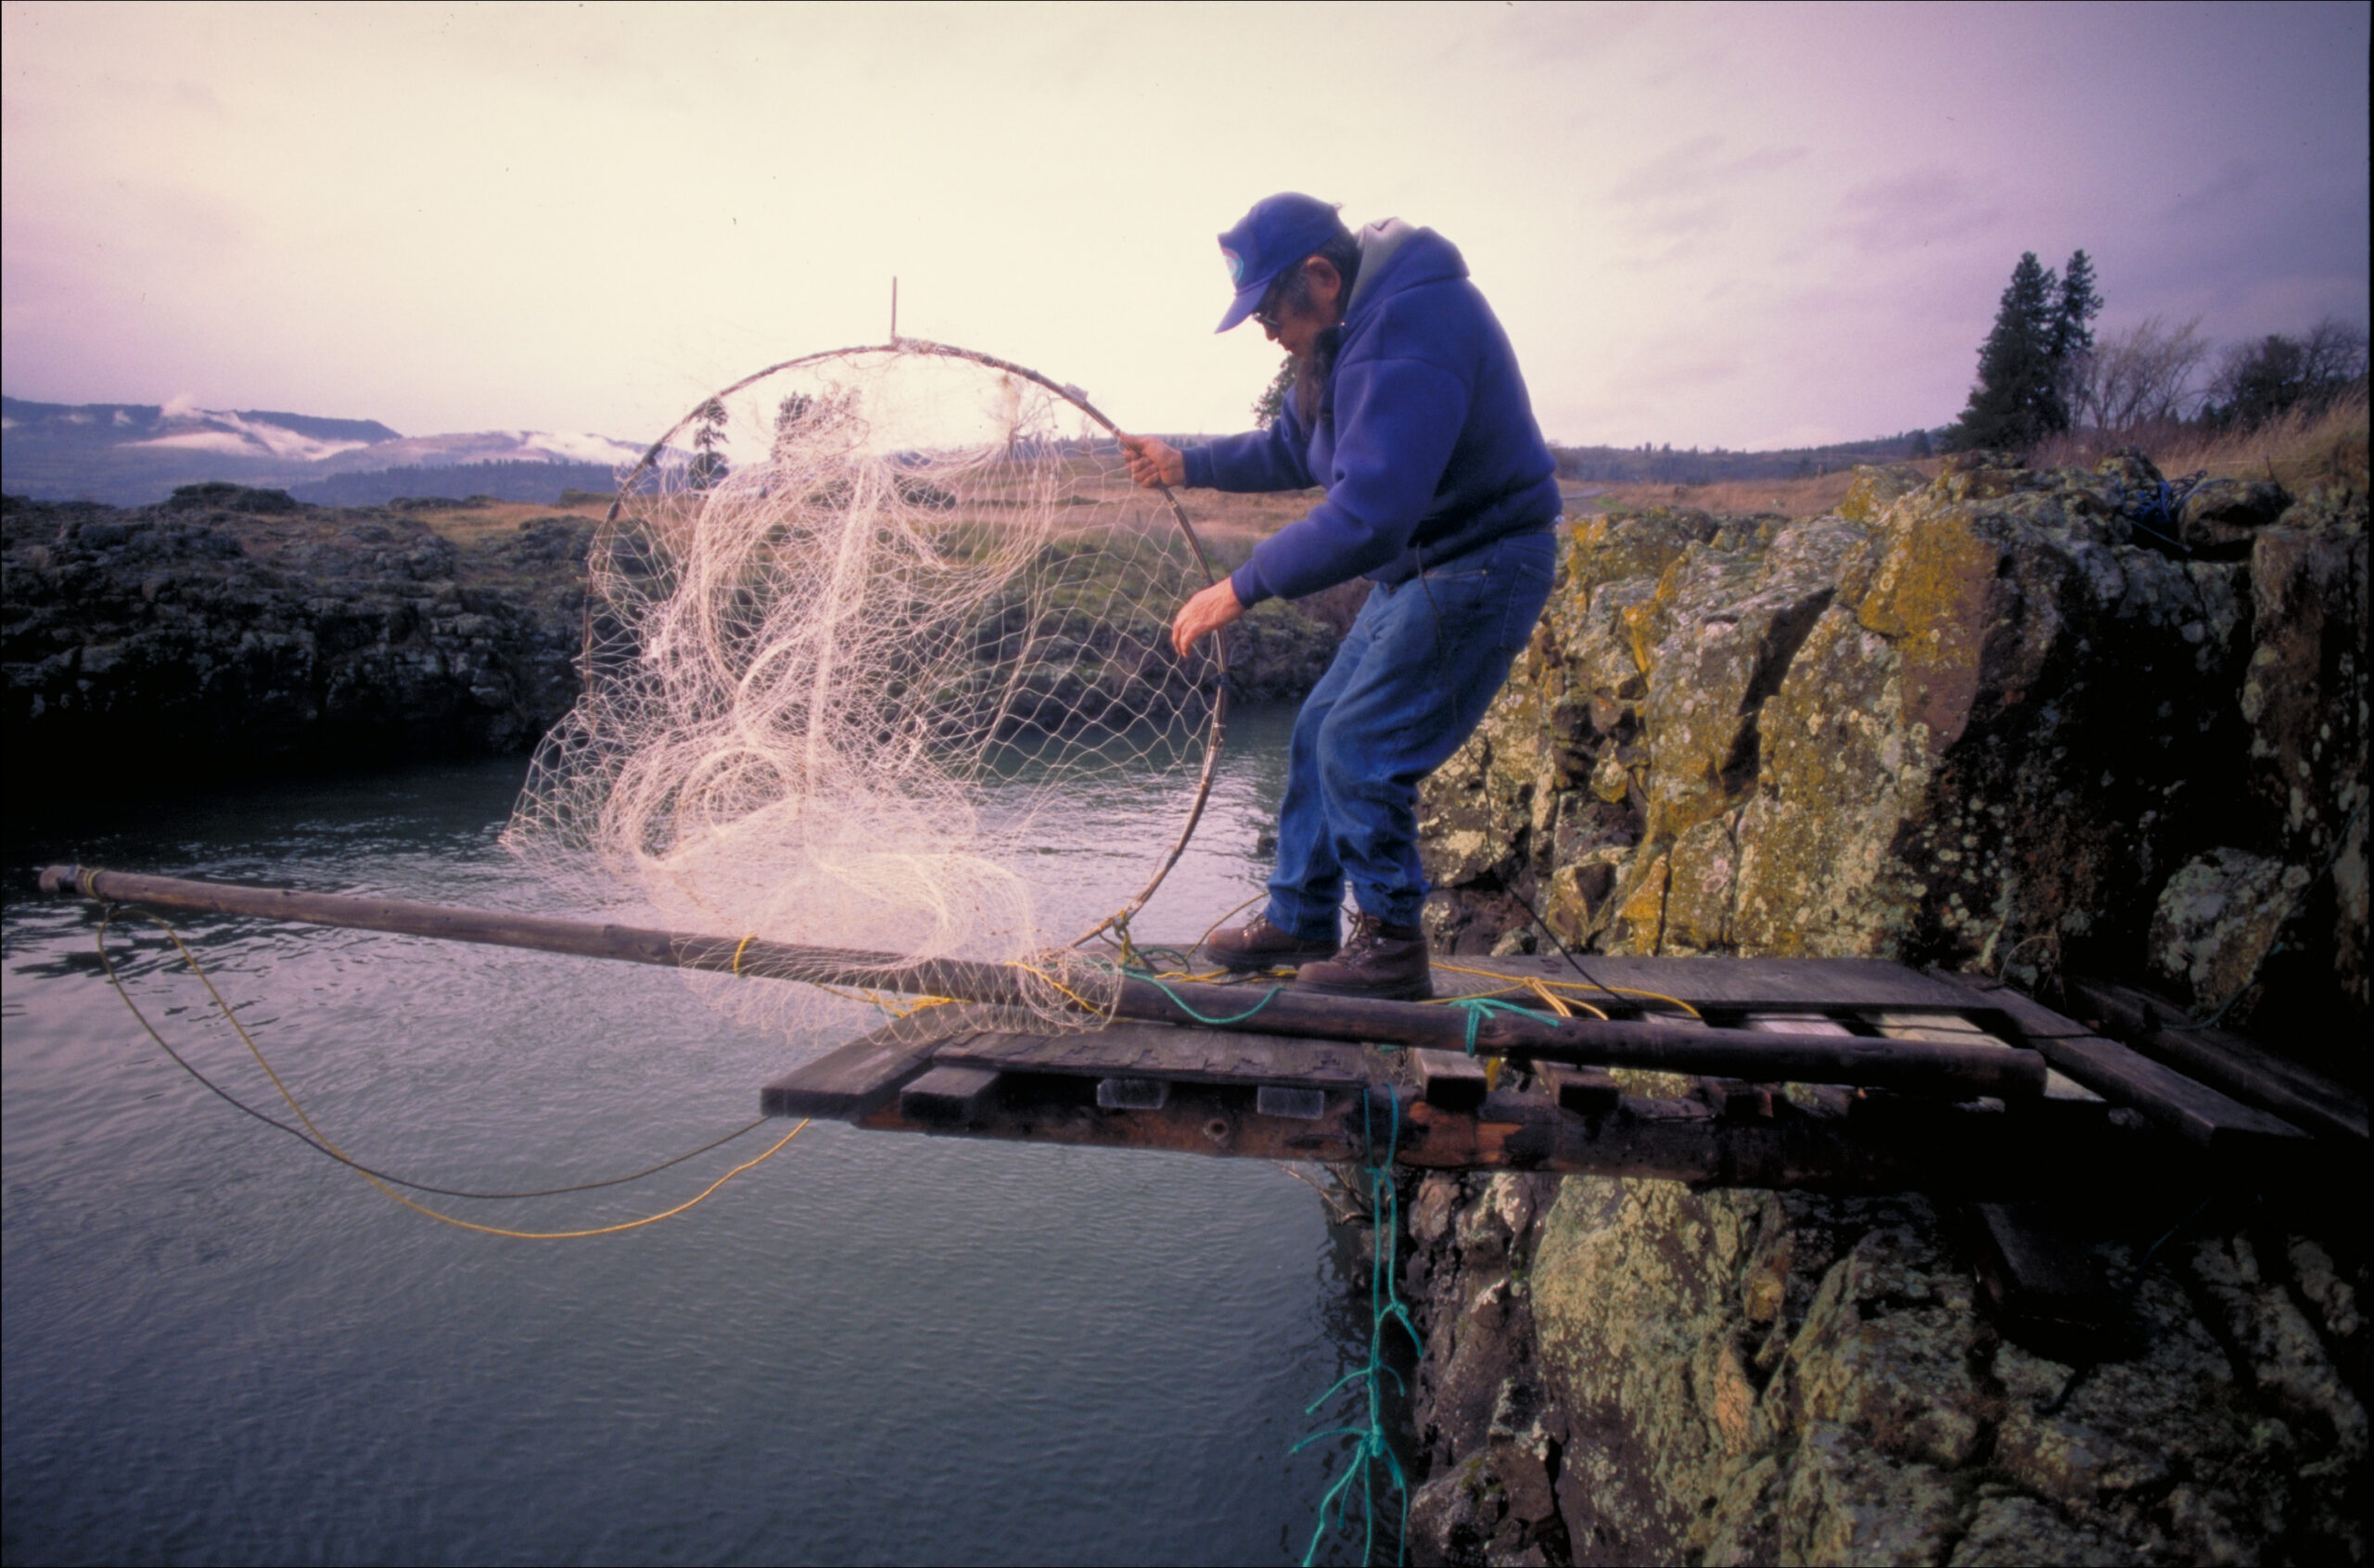 A man standing on a rocky ledge with a fishing net.